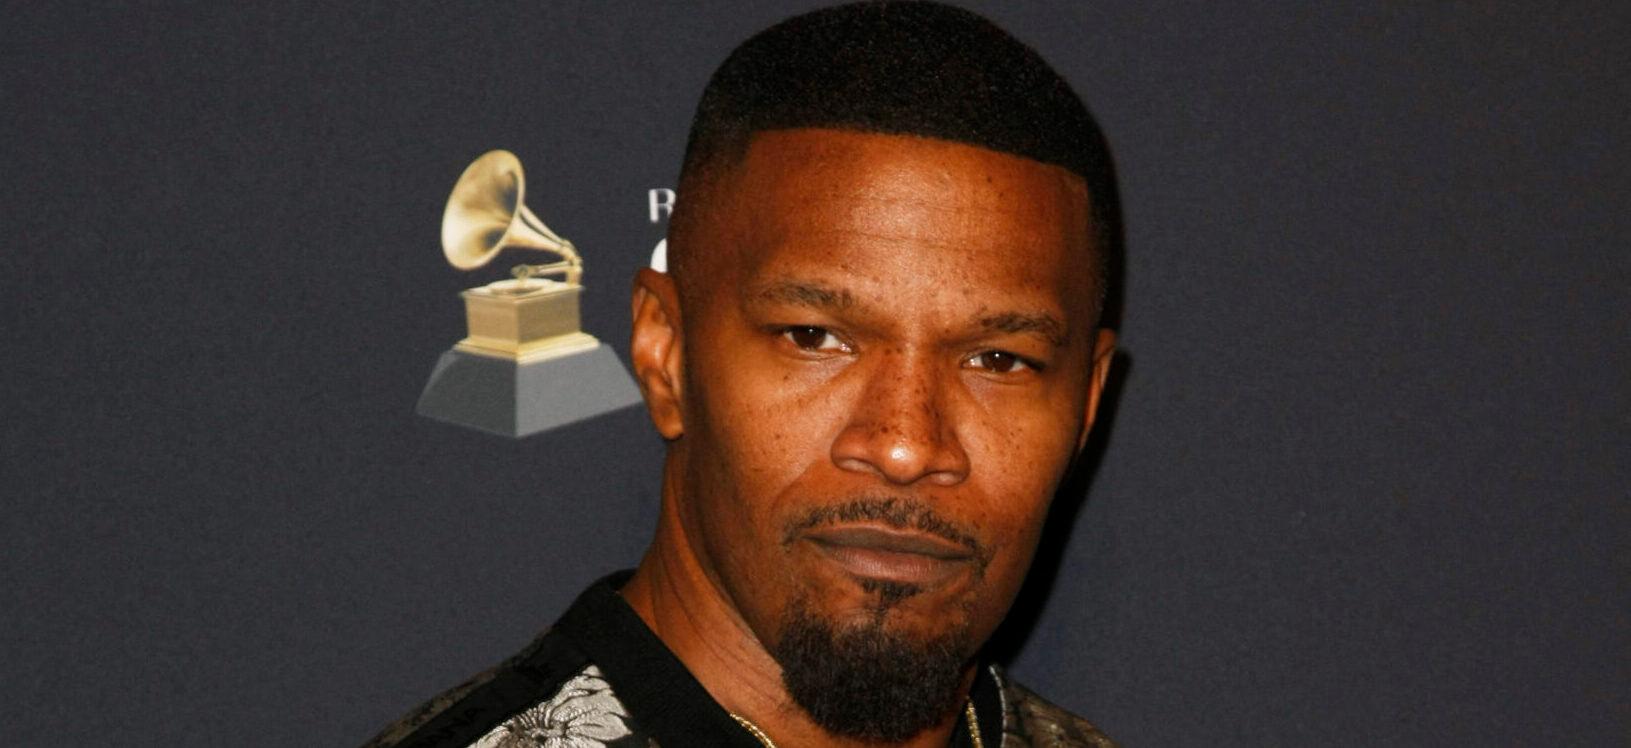 Jamie Foxx Still ‘Struggling’ After Health Scare, Quits TV Show To Avoid Stress